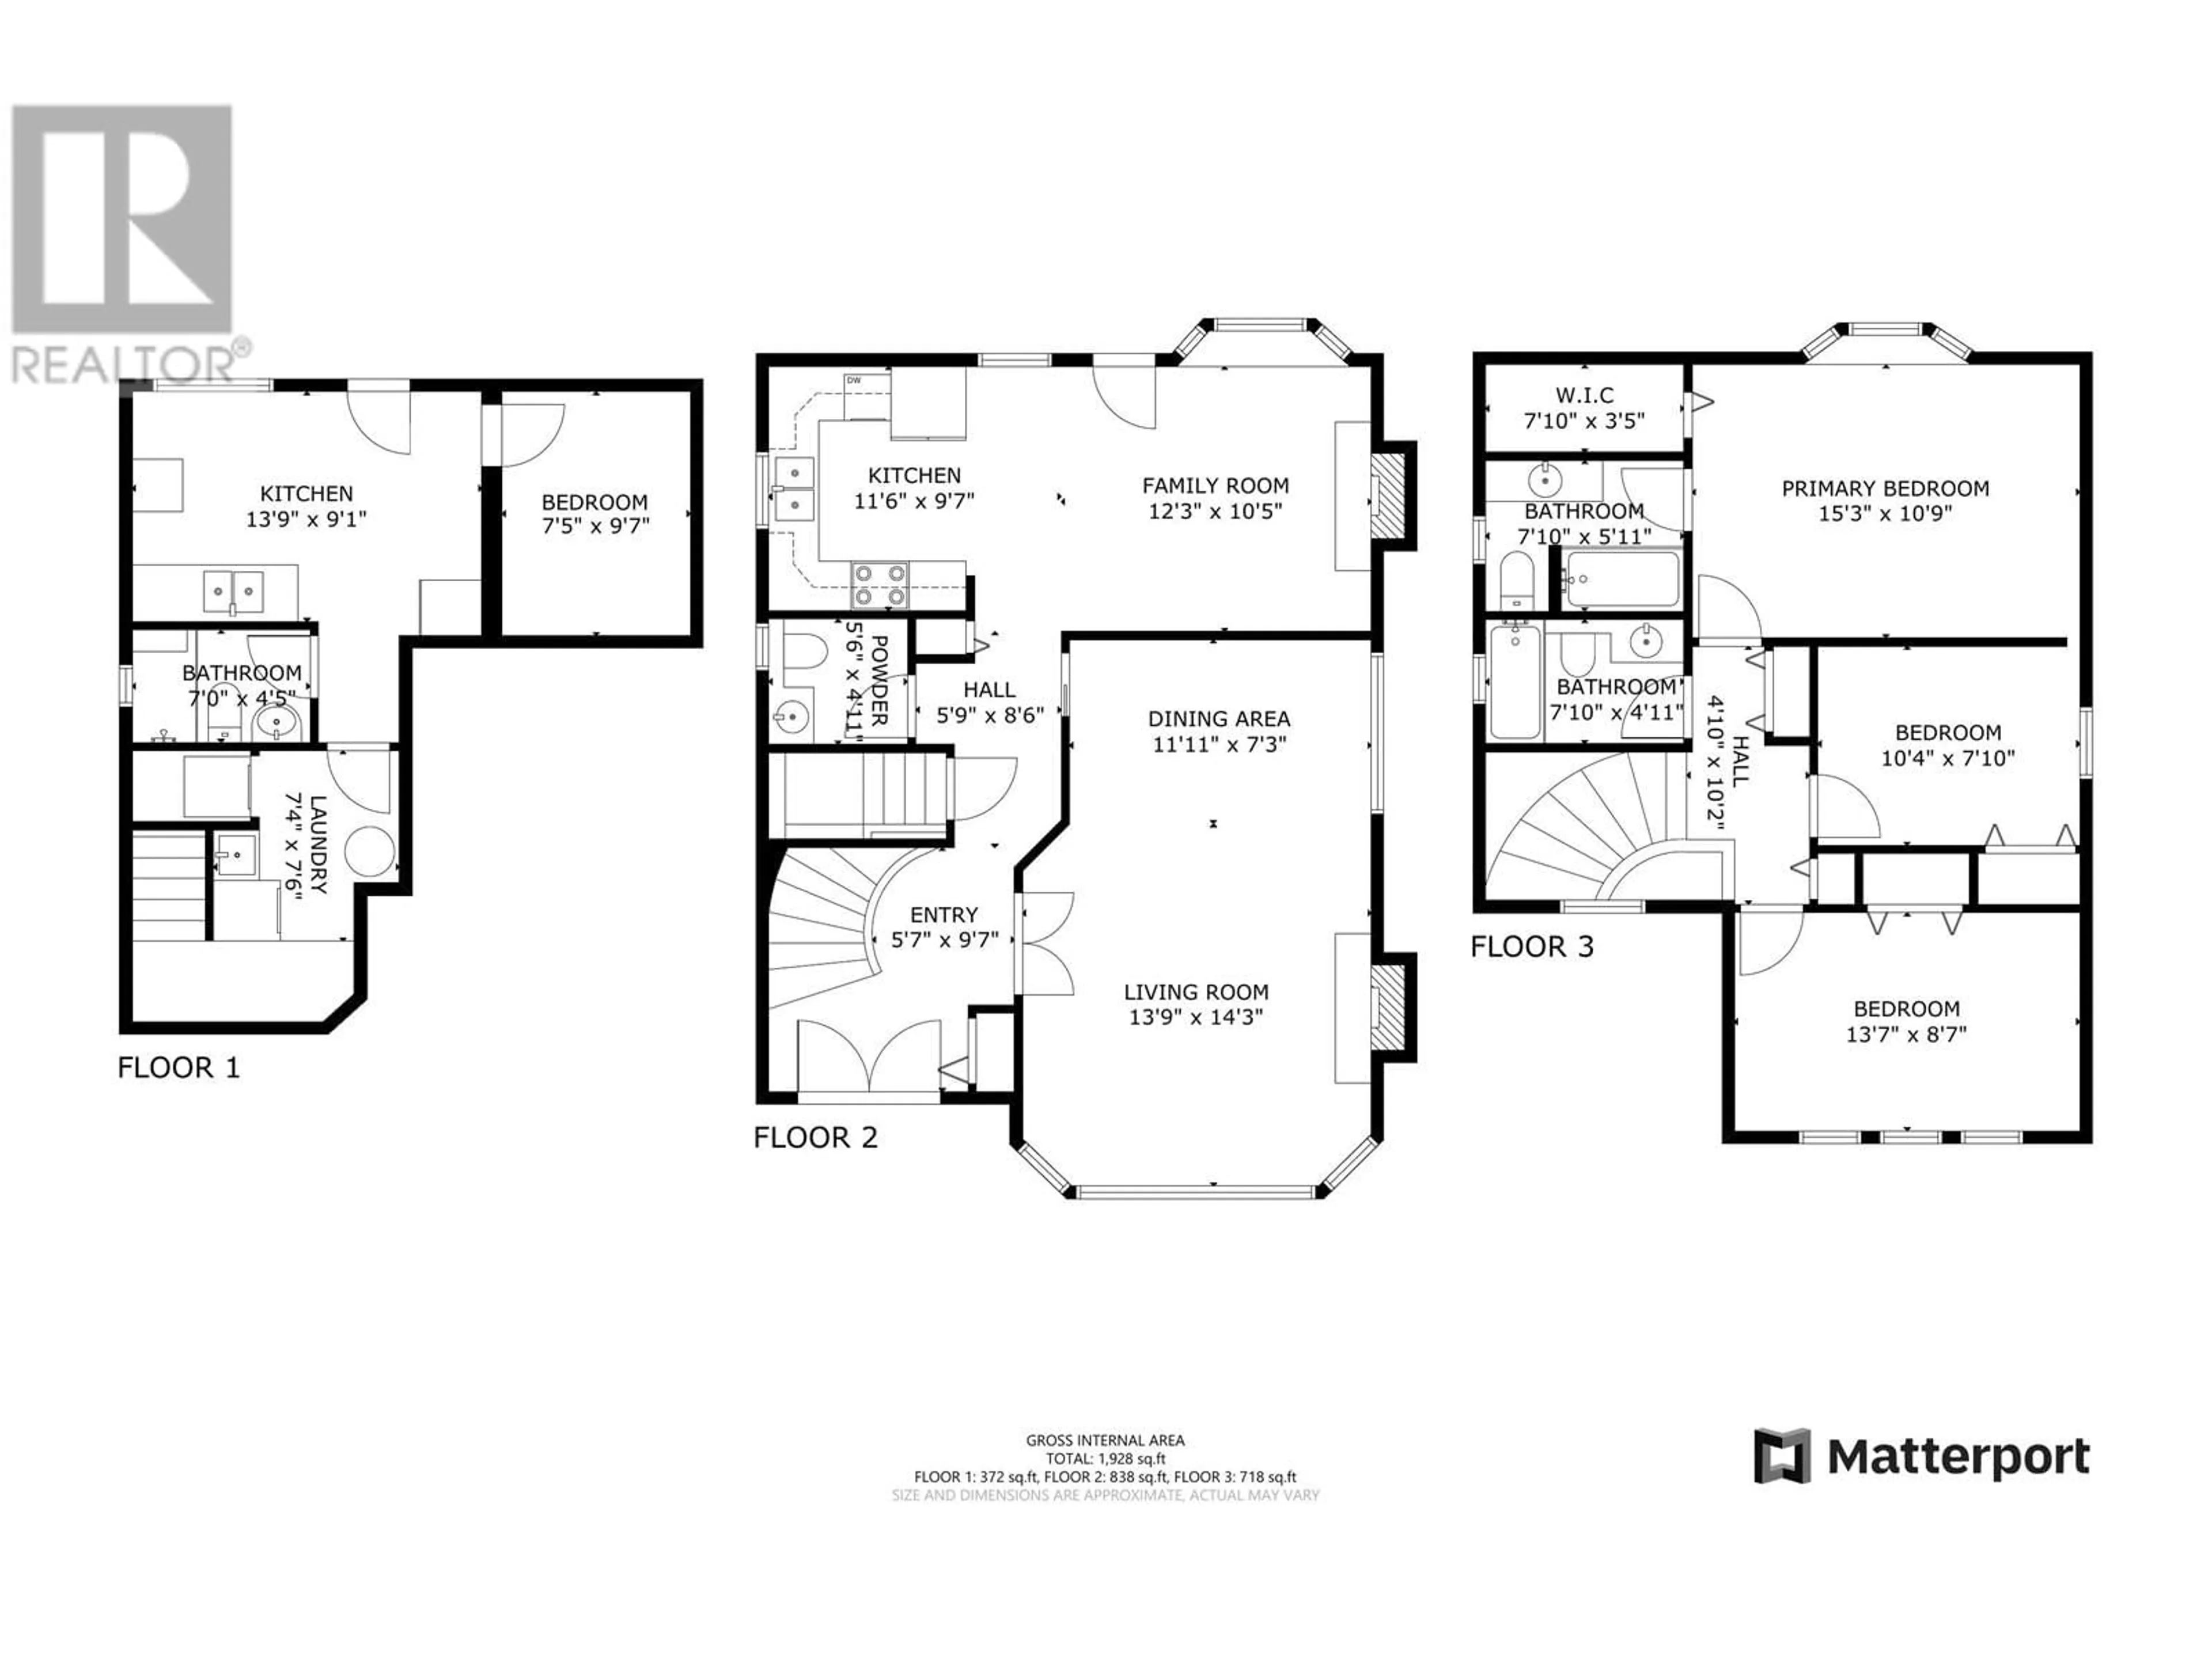 Floor plan for 5009 ST. CATHERINES STREET, Vancouver British Columbia V5W3E9